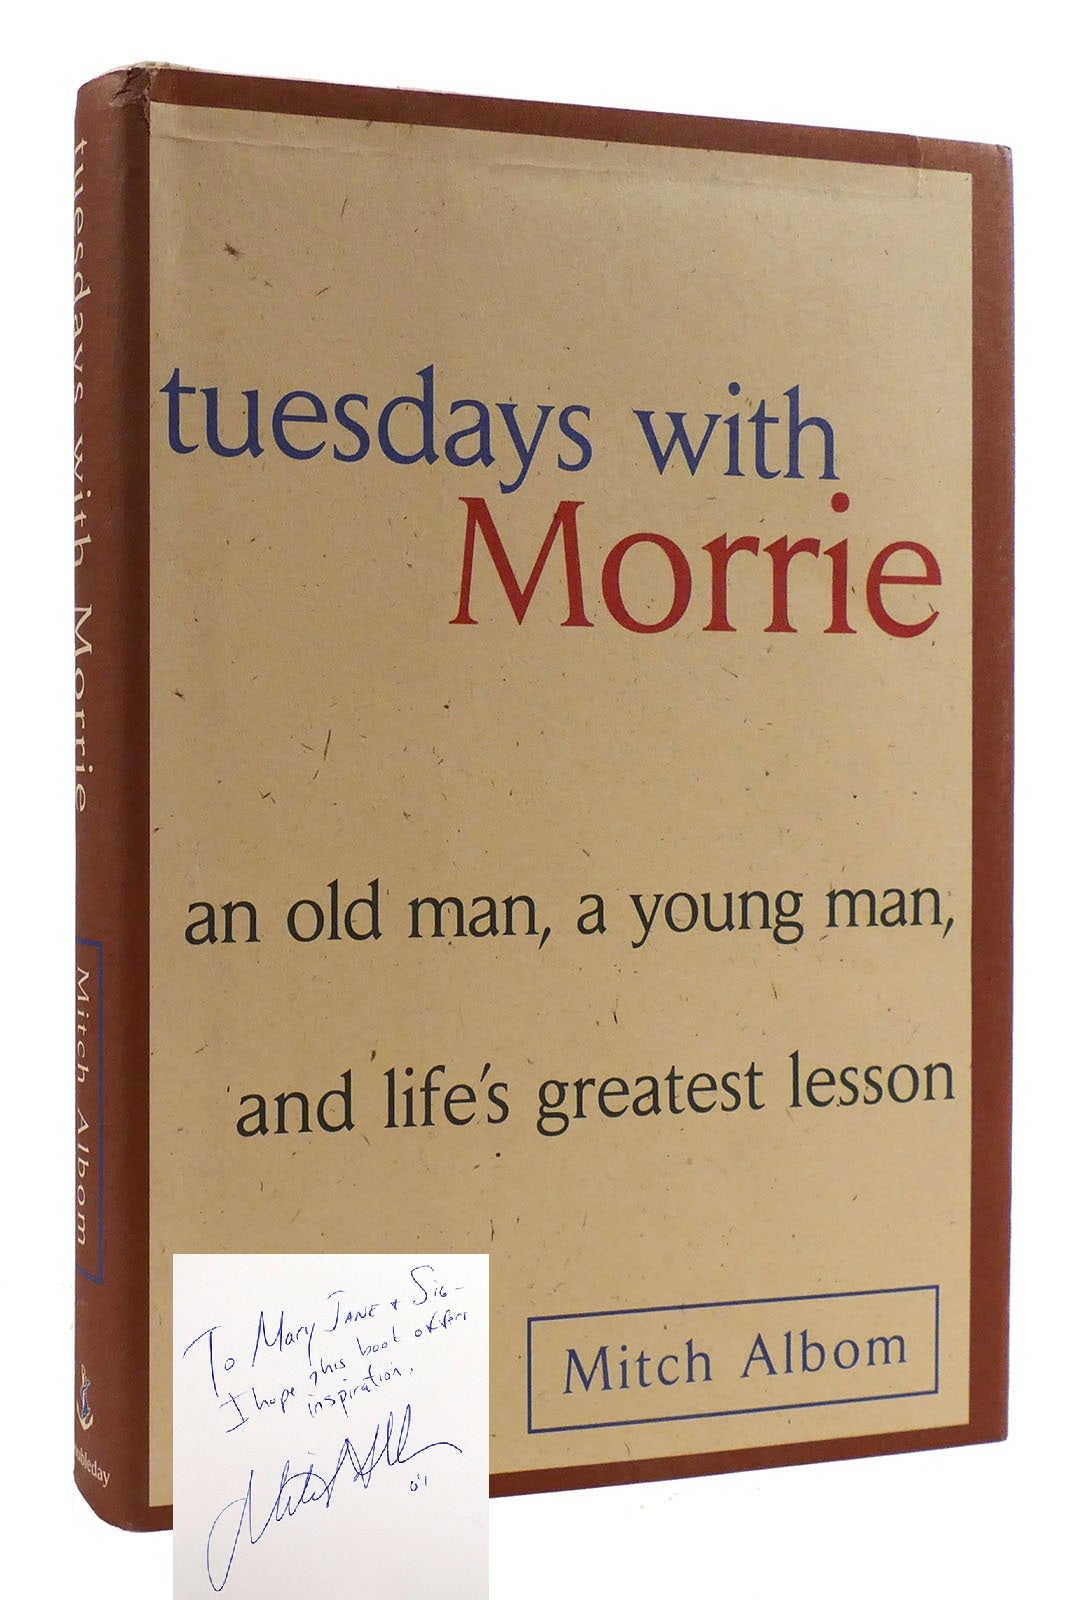 Tuesdays with Morrie : An Old Man, a Young Man, and Life's Greatest Lesson  by Mitch Albom (2005, Mass Market) for sale online